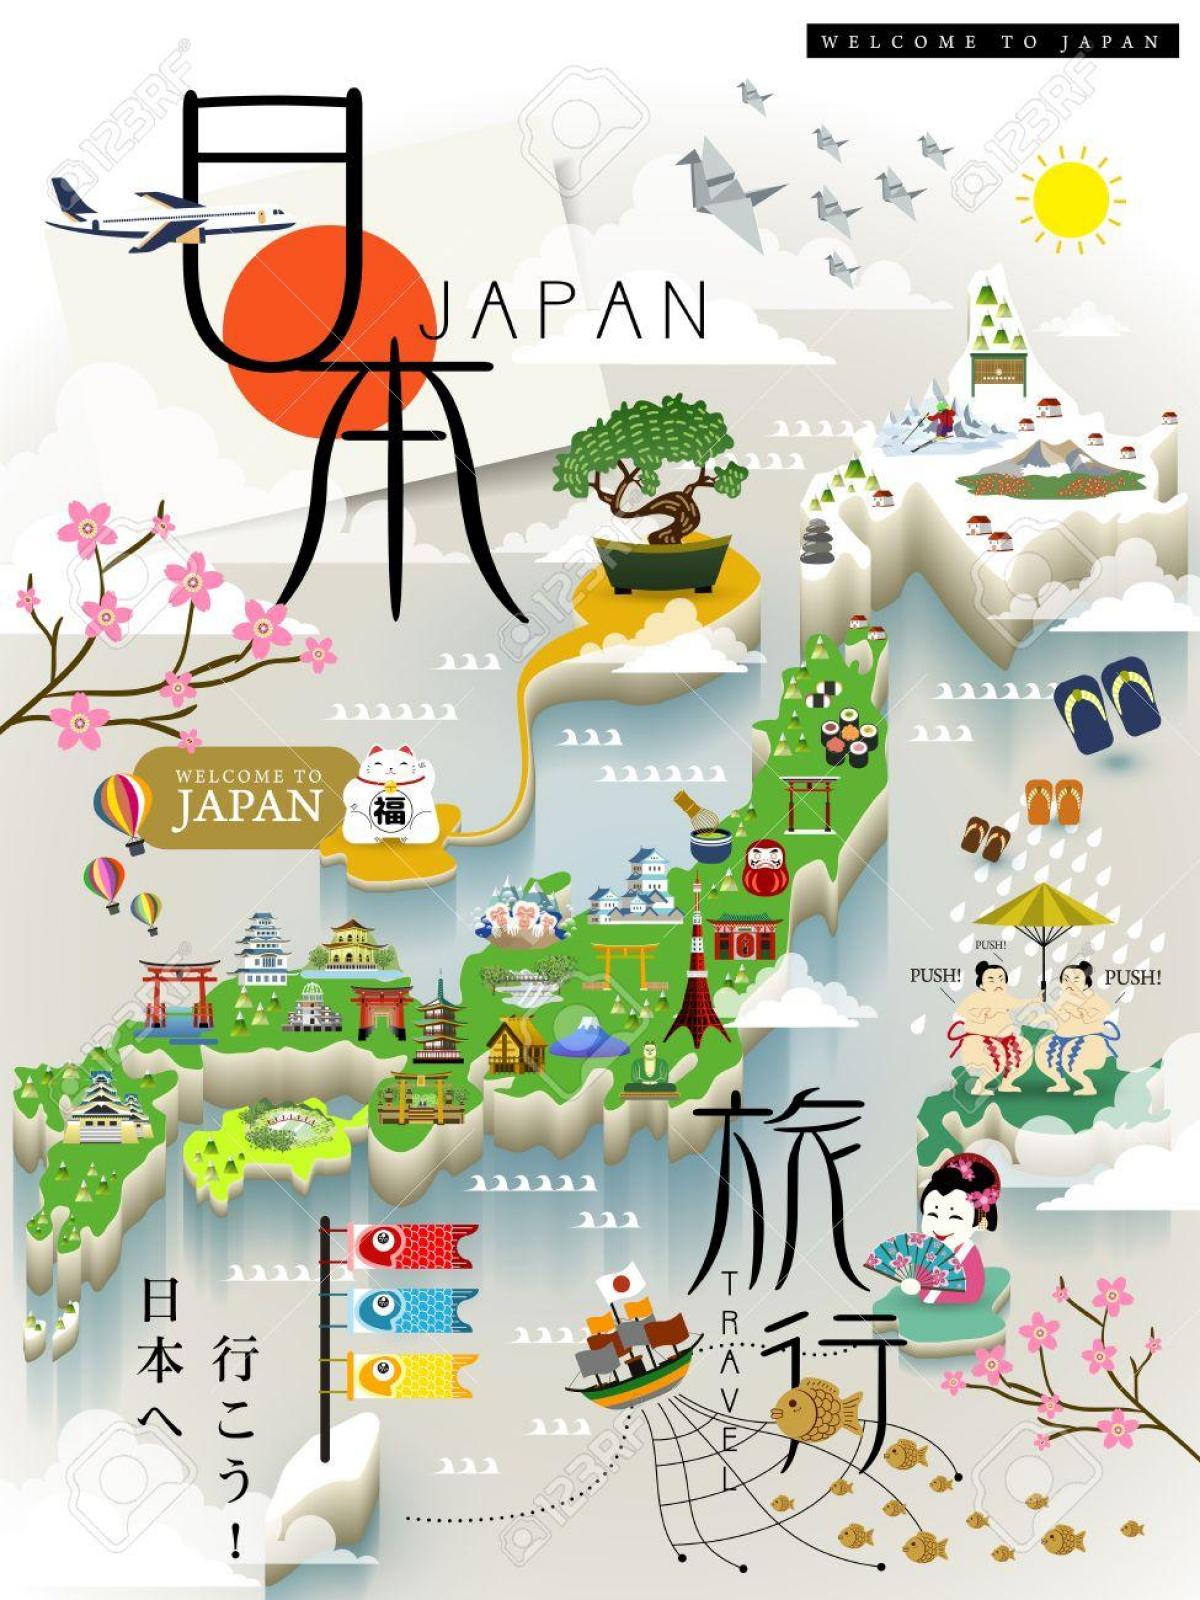 Japan tourist attractions map